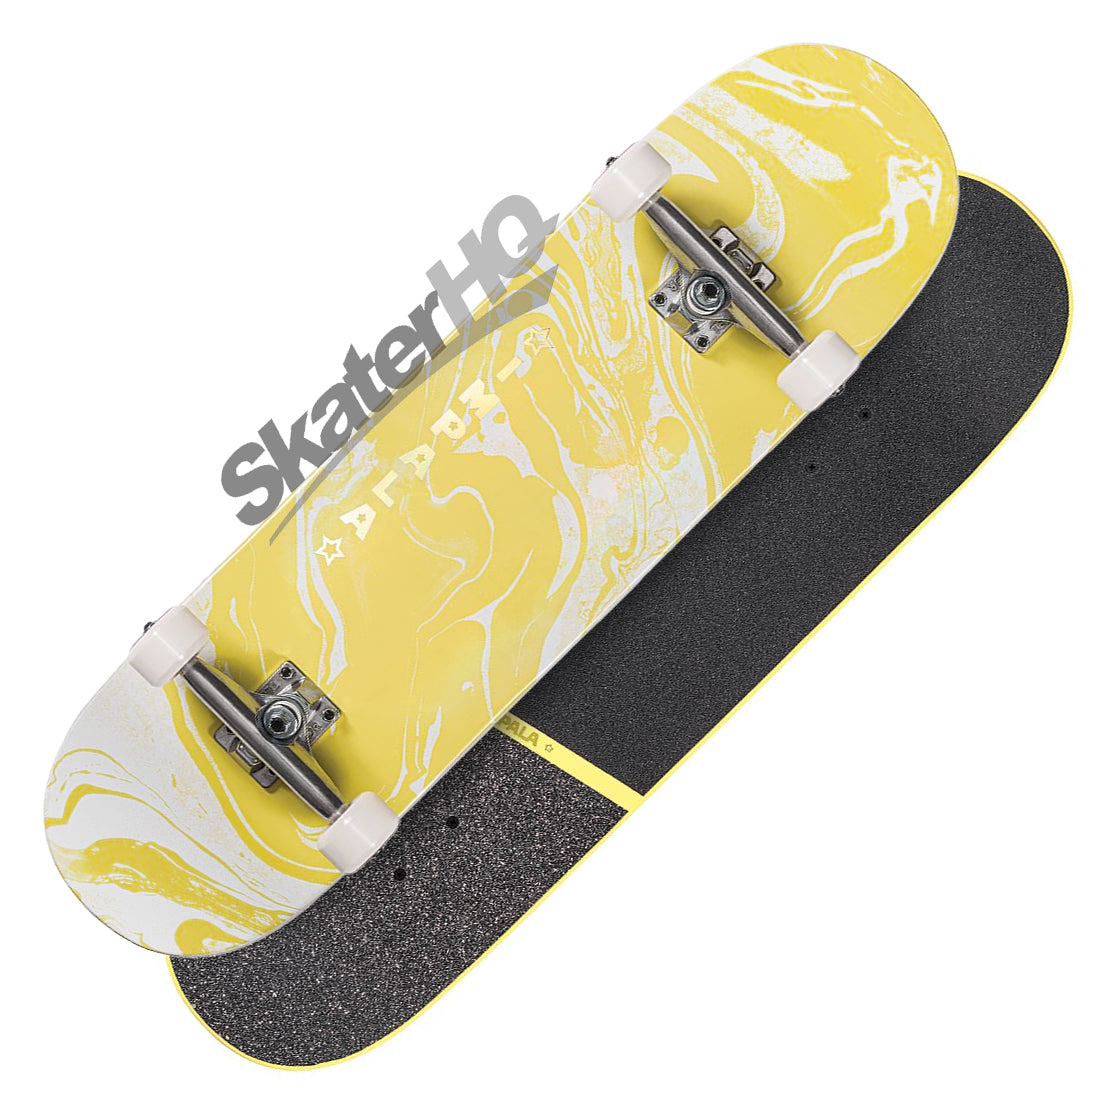 Impala Cosmos 8.5 Complete - Yellow Skateboard Completes Modern Street